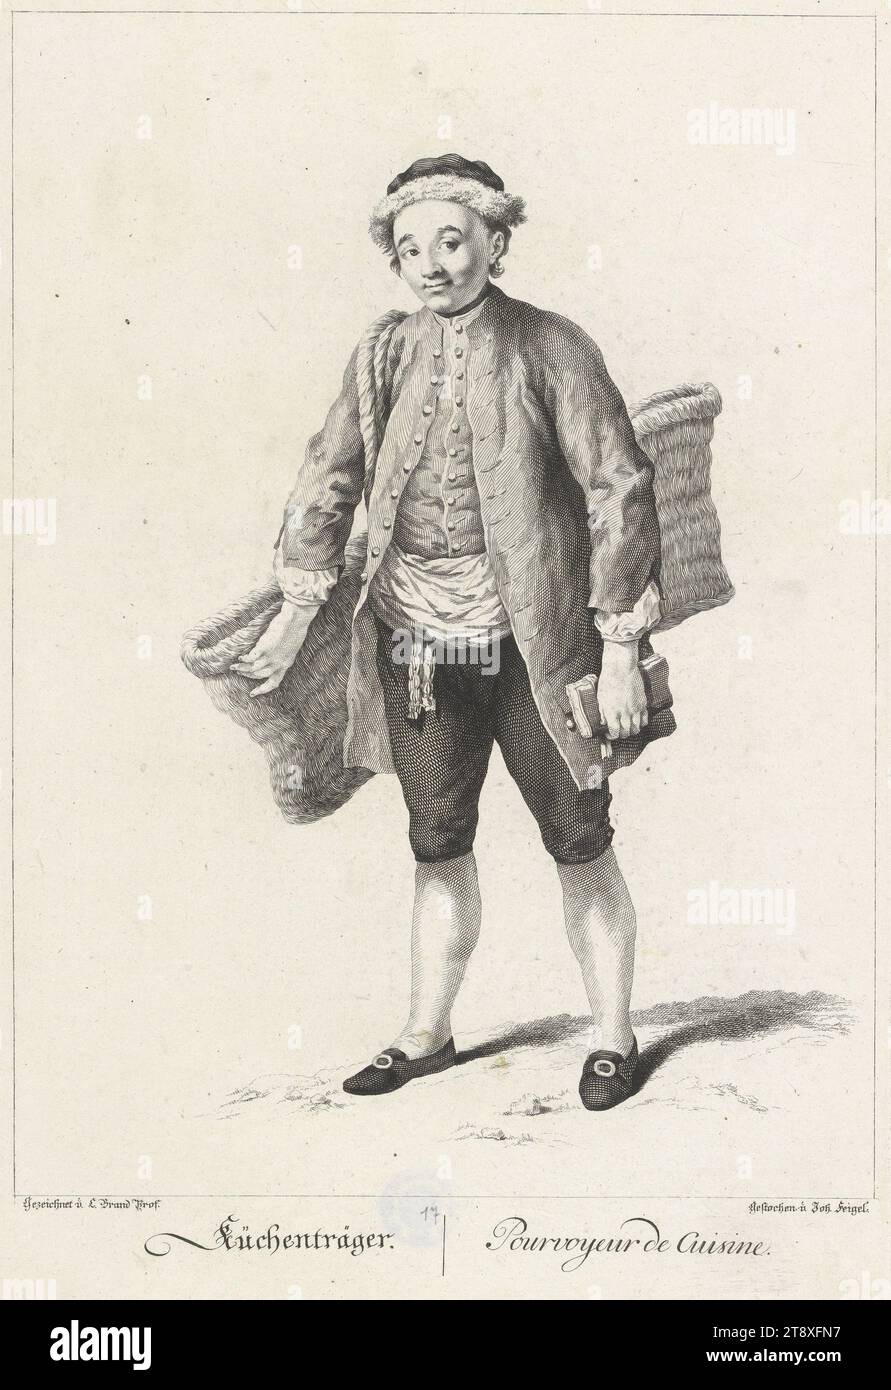 Drawings according to the common people especially The call to buy in Vienna': 'Kitchen porter., Pourvoyeur de Cuisine.', Johann Christian Brand (1722-1795), Artist, Johann Feigel, copper engraver, 1775, paper, copperplate engraving, sheet size 44, 3×31, 4 cm, plate size 36×24, 3 cm, Job Depictions, Eat and Drink, Services, Fine Arts, Stereotypes, man, The Vienna Collection Stock Photo